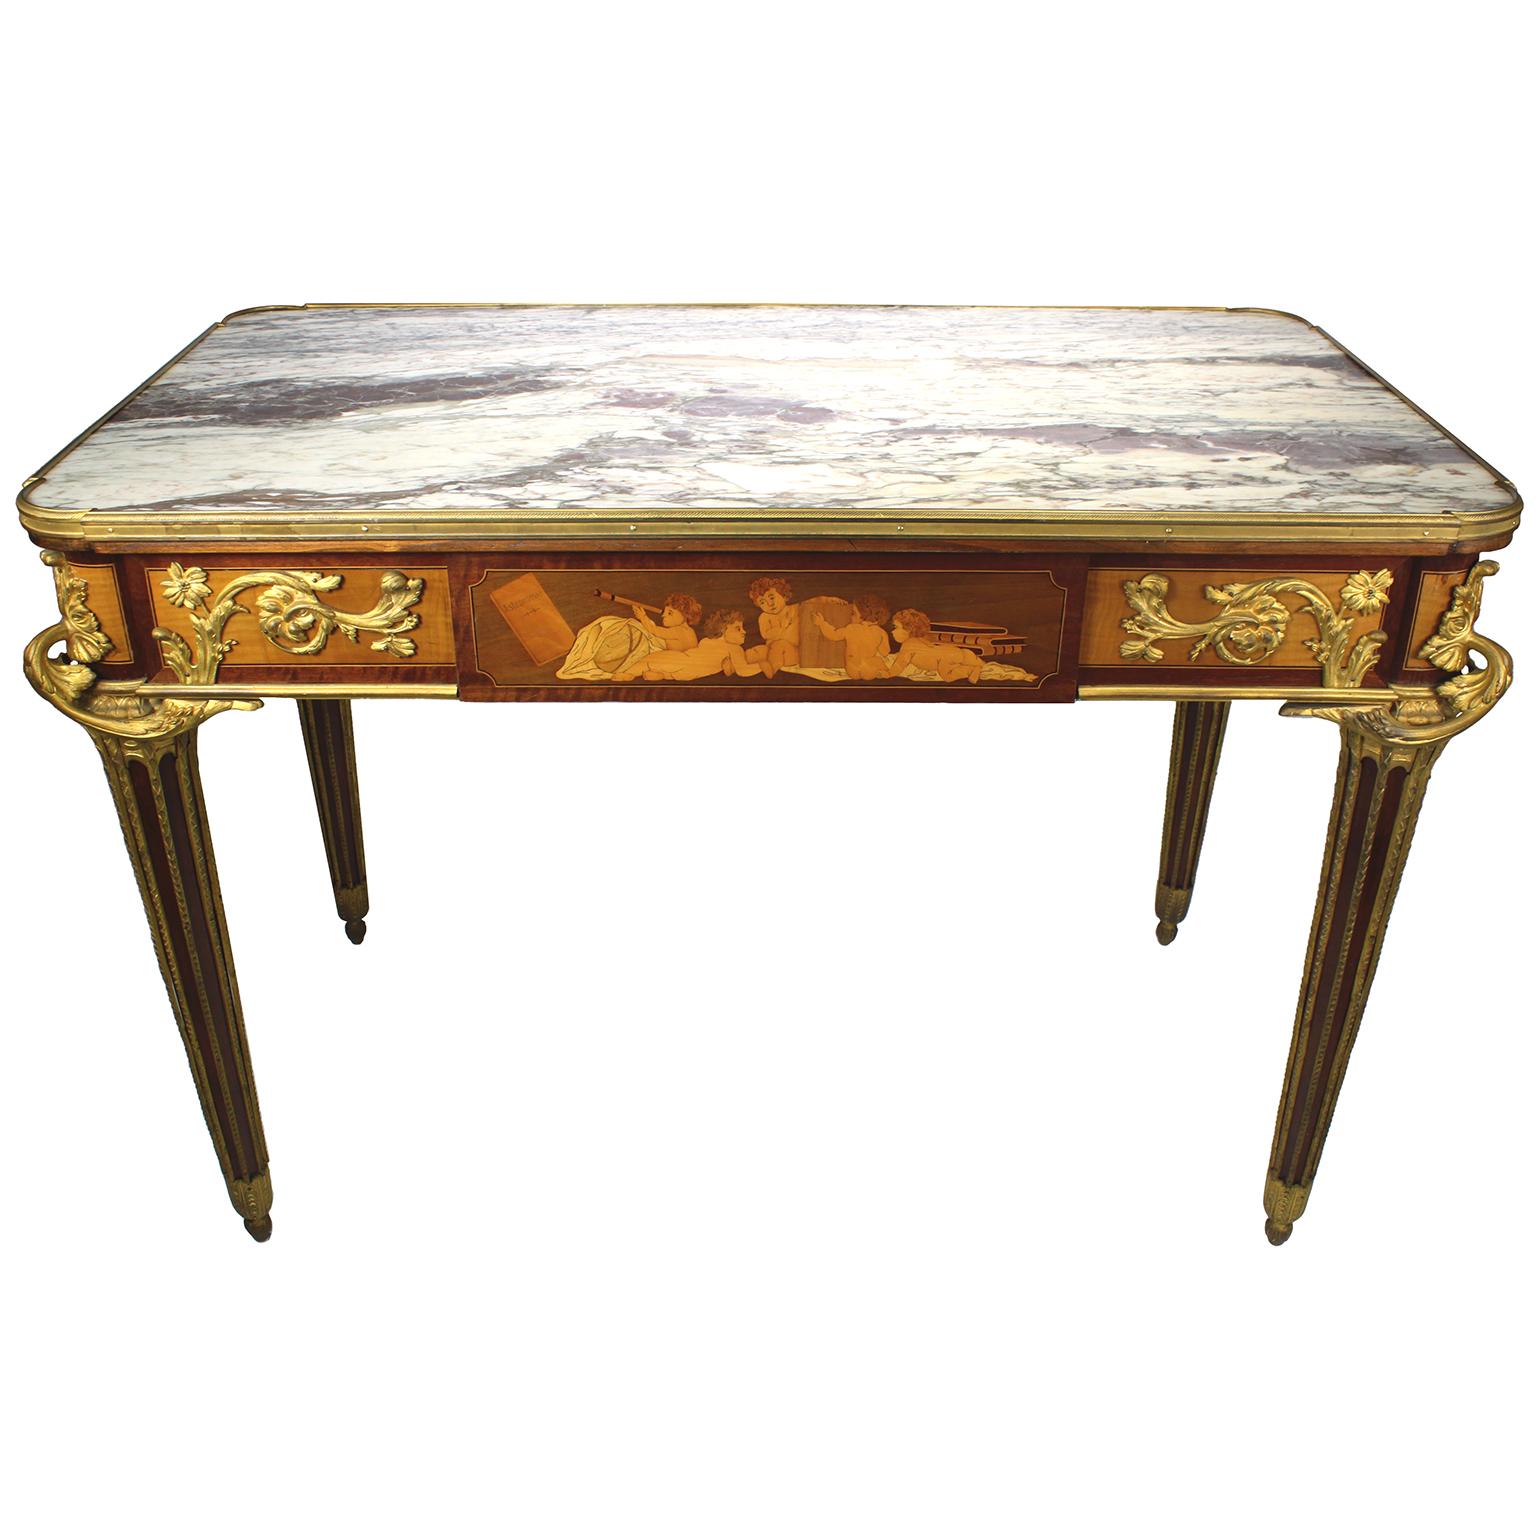 A Very Fine French 19th century Louis XVI Style Ormolu-Mounted Kingwood and Bois Citronnier Marquetry center table or writing table, attributed to François Linke (1855-1946), after the model by Jean-Henri Riesener (French, 1734-1806). The